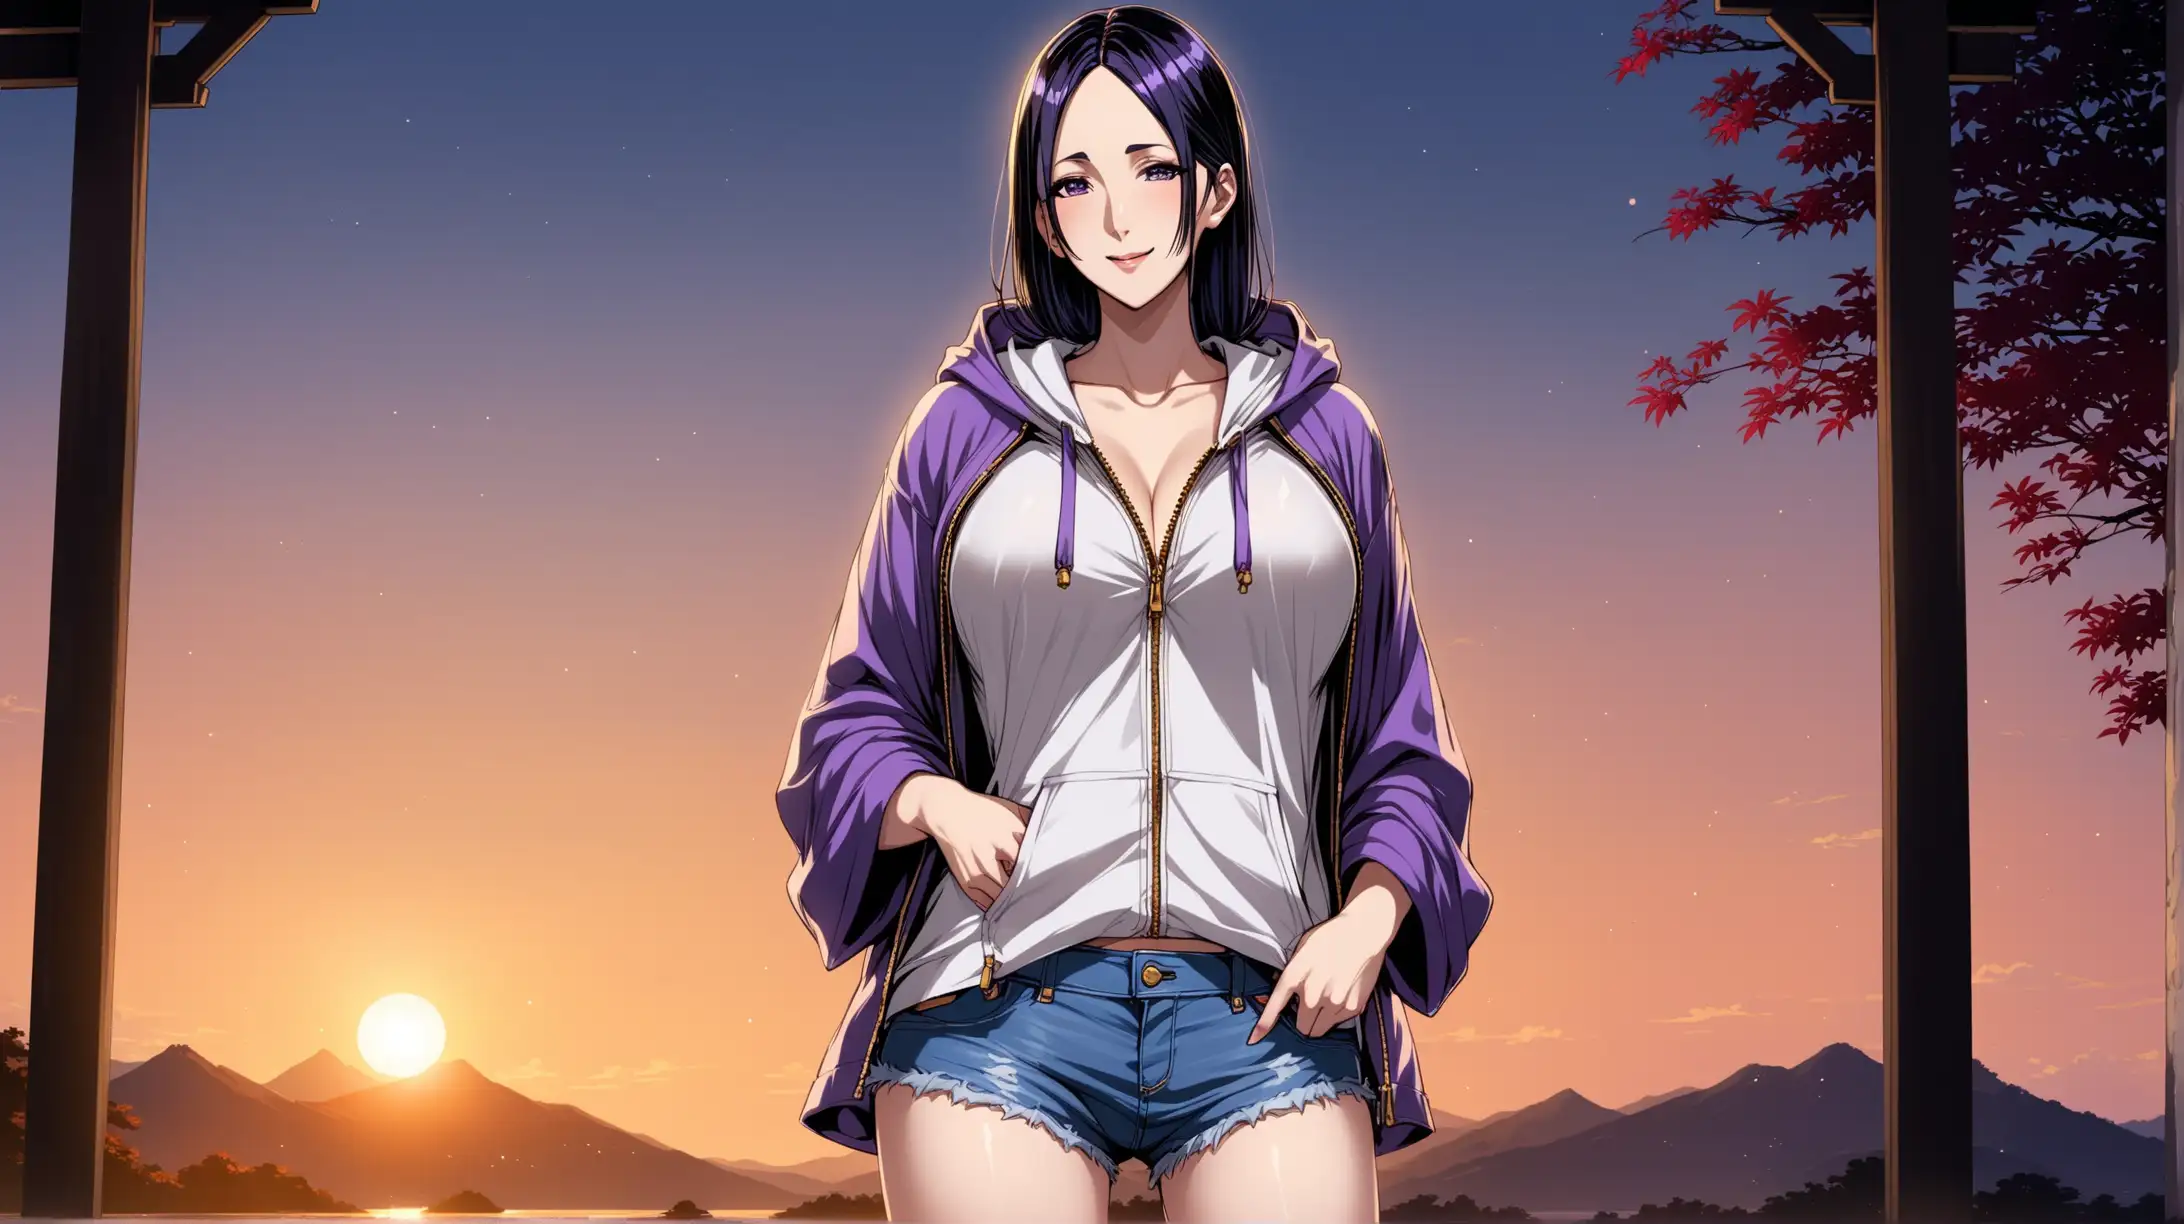 Draw the character Minamoto no Raikou, high quality, dim lighting, long shot, outdoors, standing, seductive pose, jean shorts and an unzipped open hoodie with white shirt underneath, flirtatious smile